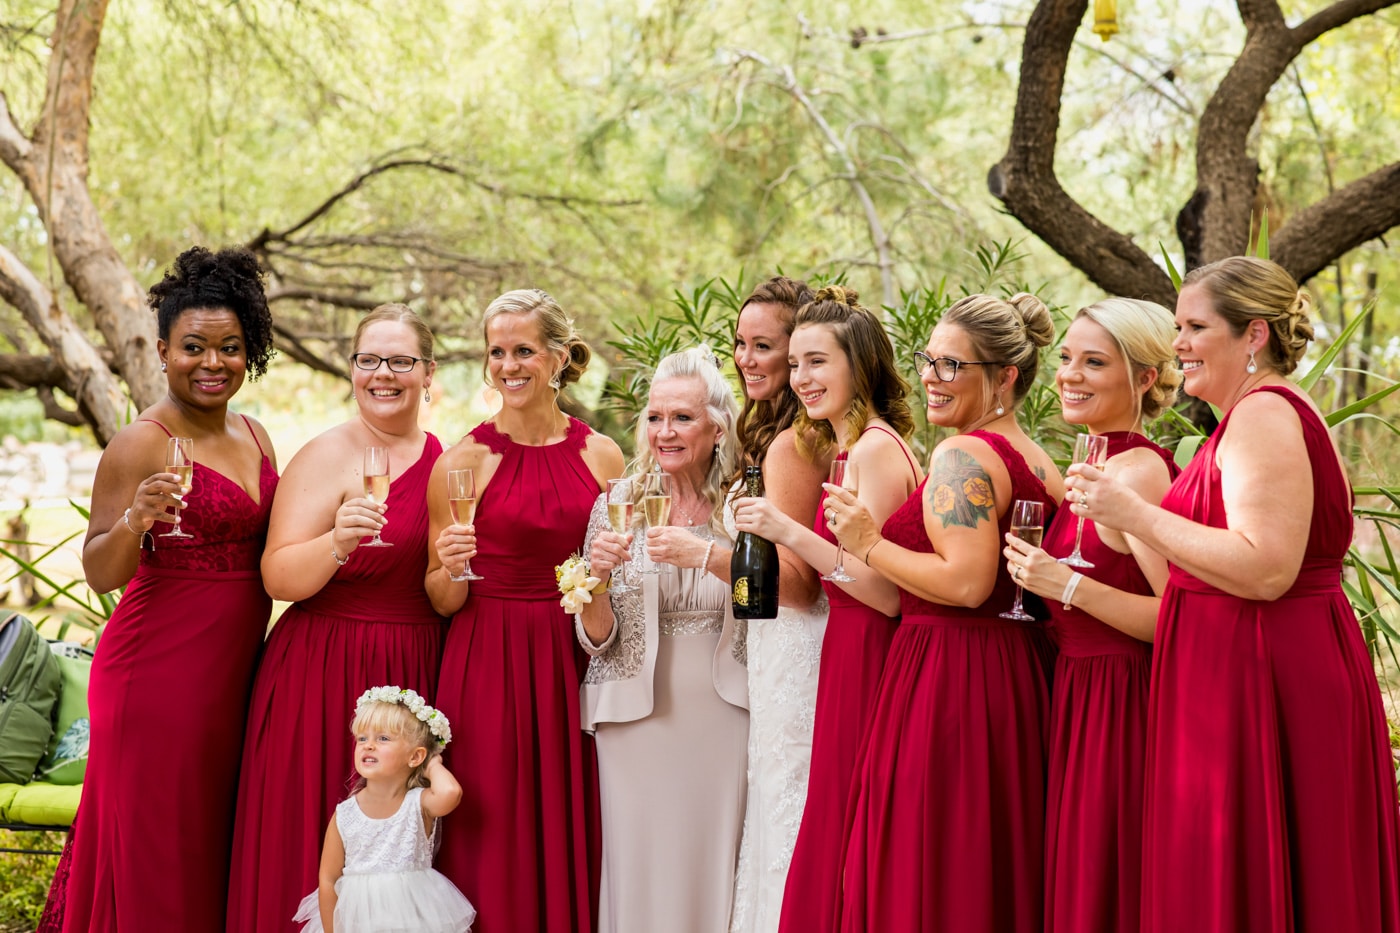 Bride and bridal party holding drinks smiling